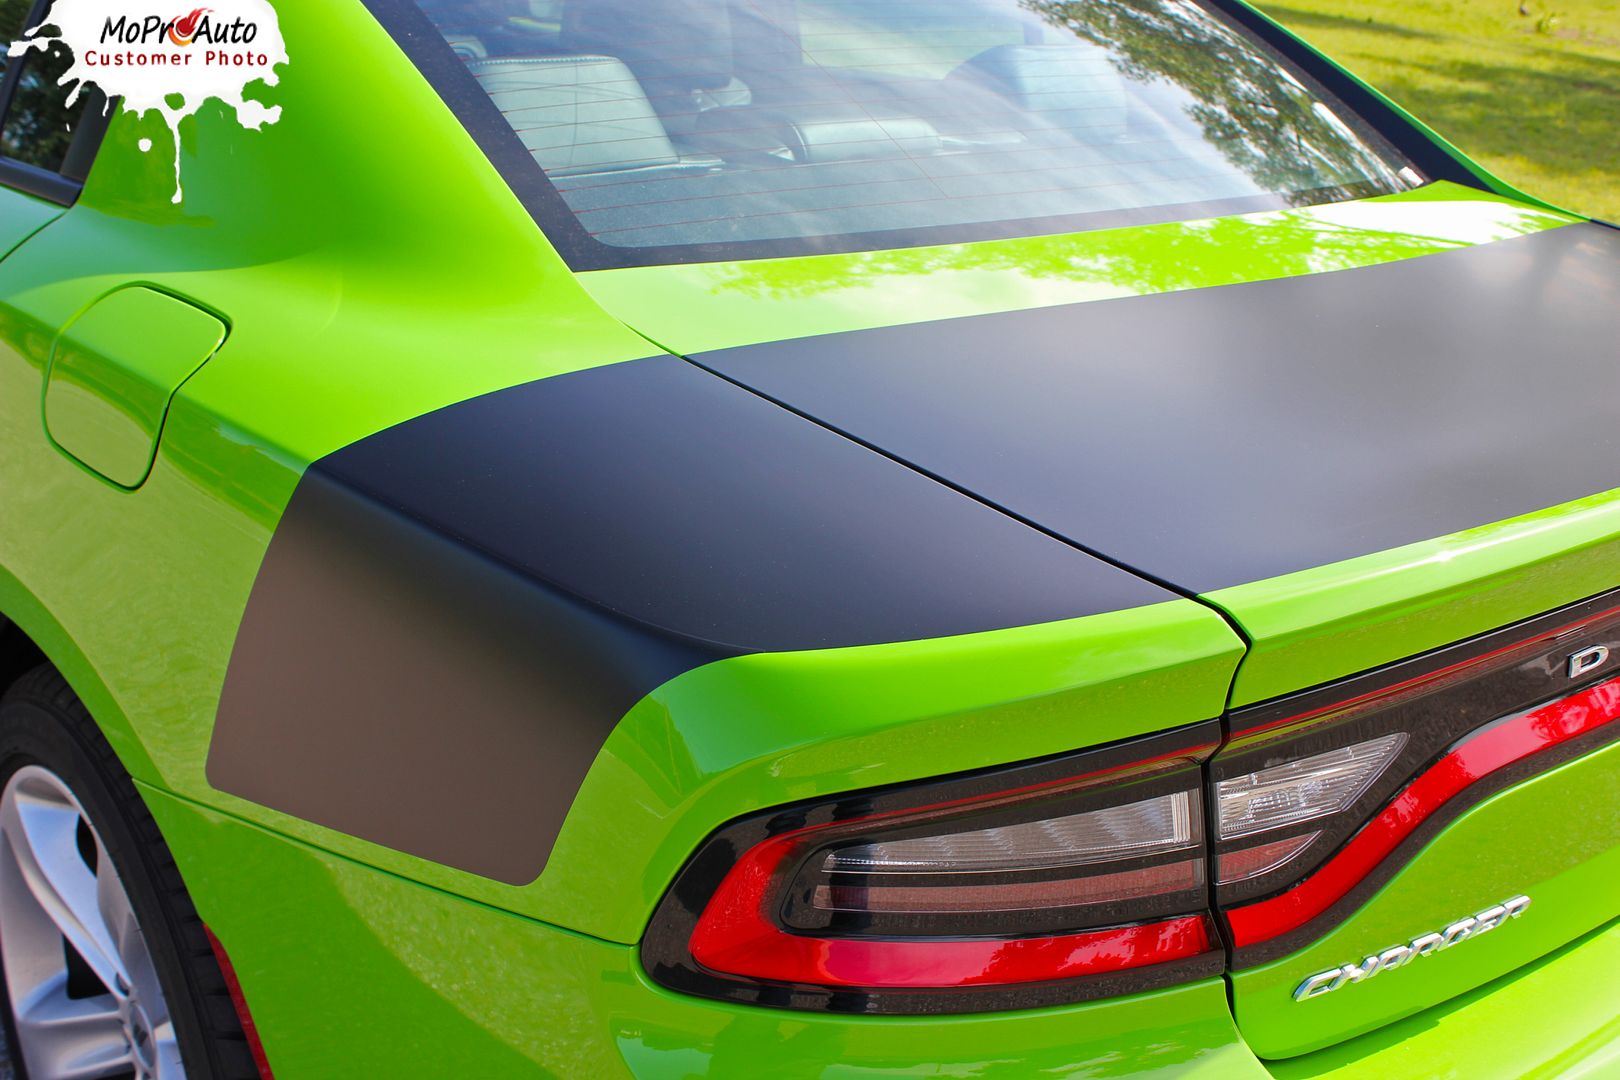 2015 2016 2017 SINISTER TAILBAND : Dodge Charger Daytona Hemi SRT 392 Style Decklid Trunk Vinyl Graphic Decals and Stripe Kit